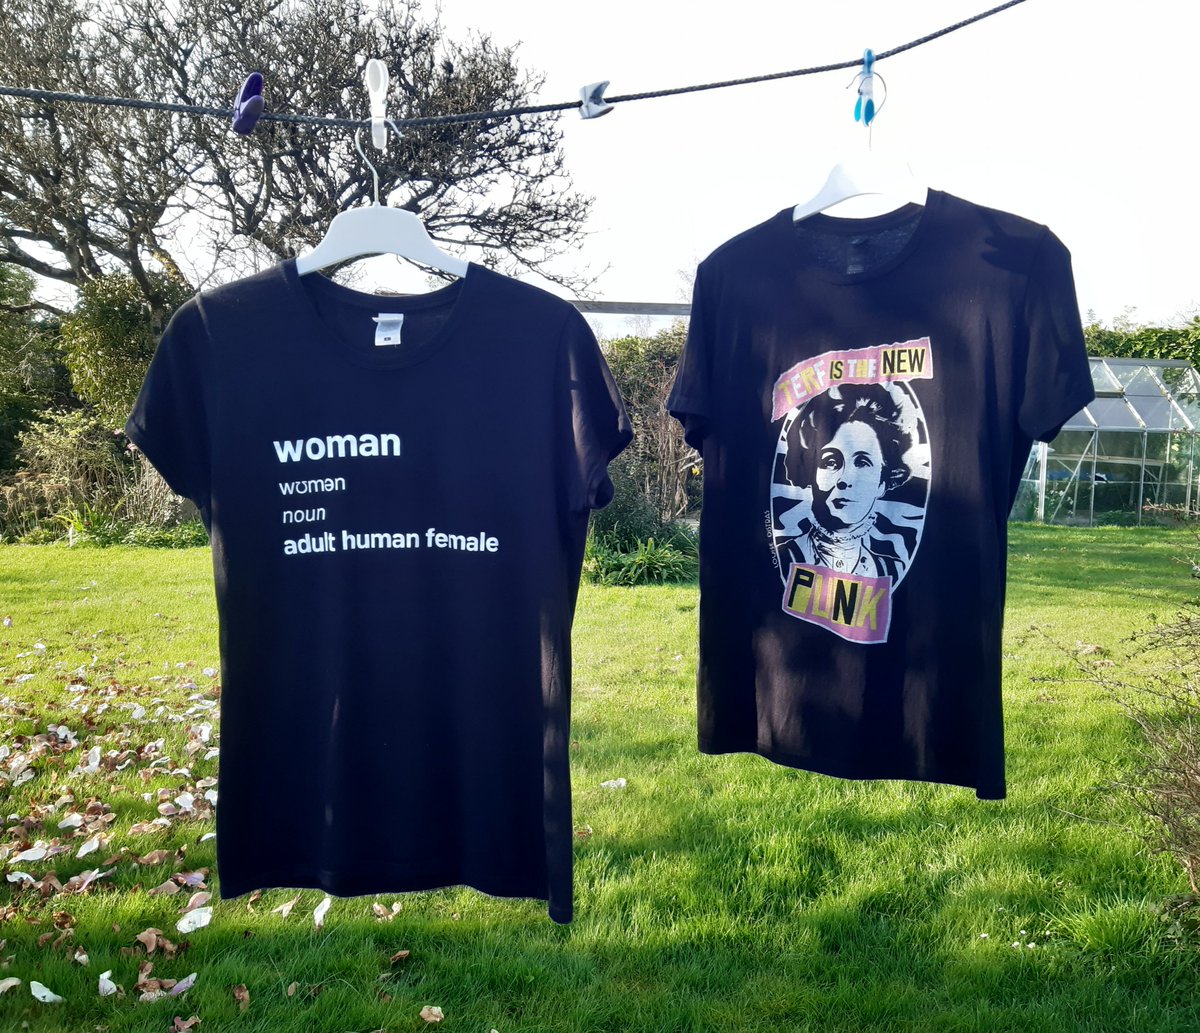 The best thing about this sunny weather is drying my t-shirts outside on the washing line. 😎
@ThePosieParker @terfpunks 
#woman #AdultHumanFemale #TERFIsTheNewPunk